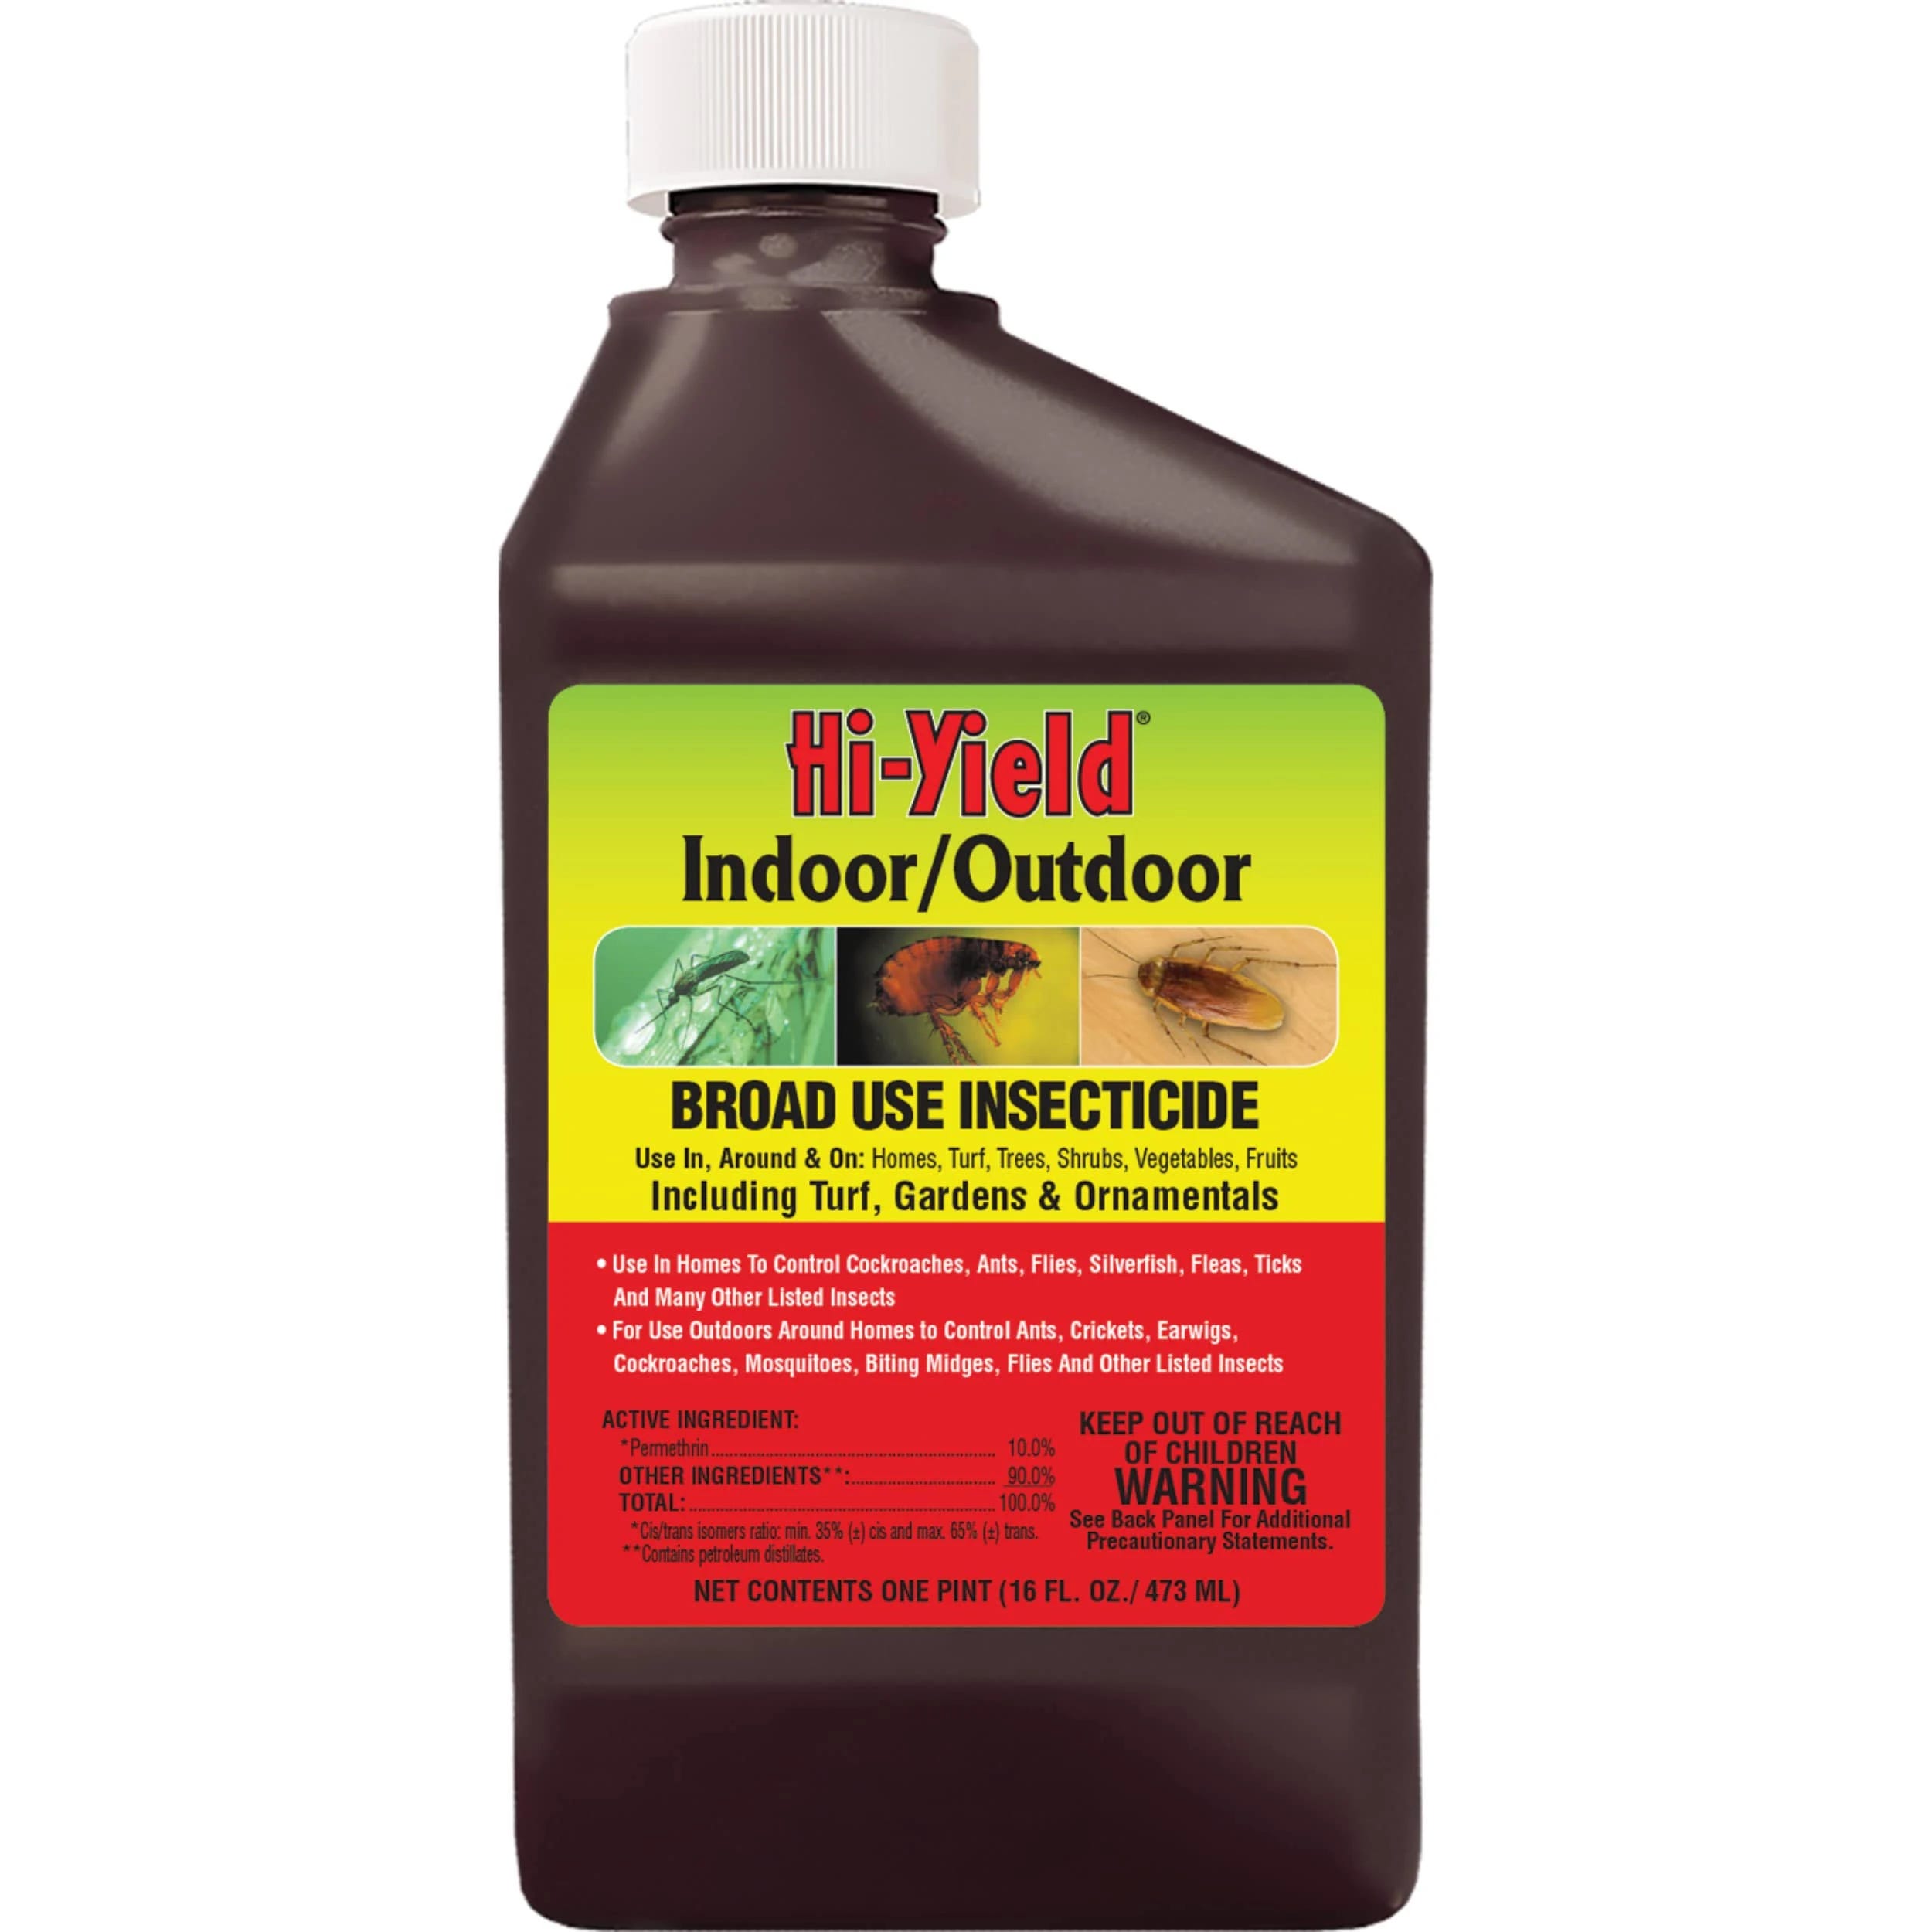 Broad Use Pest Control Insecticide for Indoor and Outdoor Use | Image